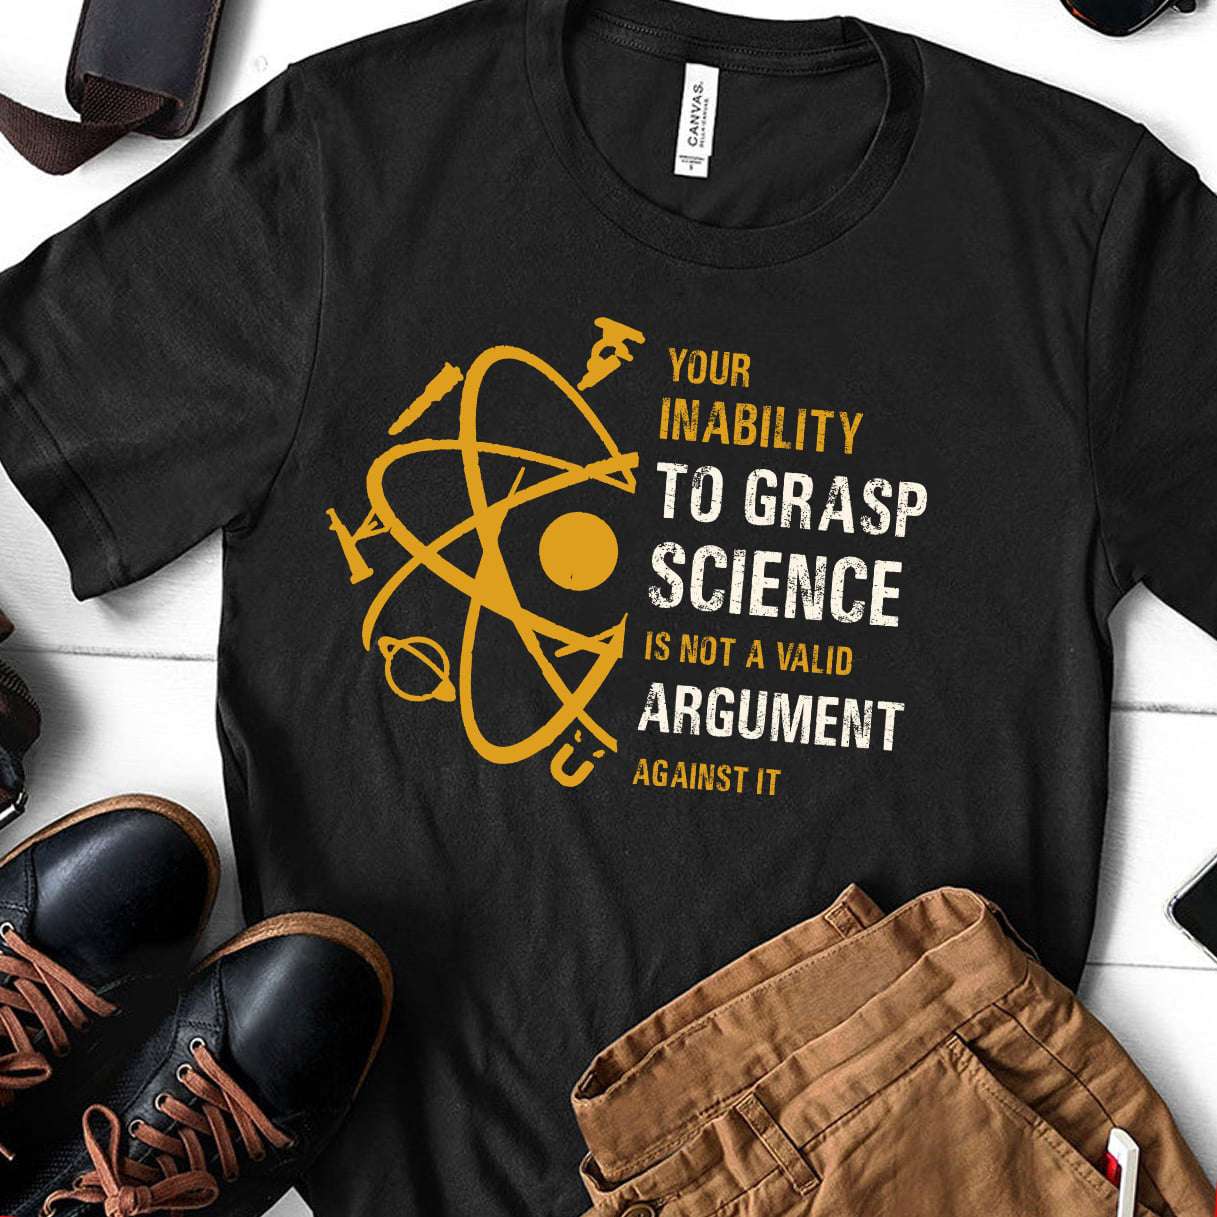 Your inability to grasp science is not a valid argument against it - The element